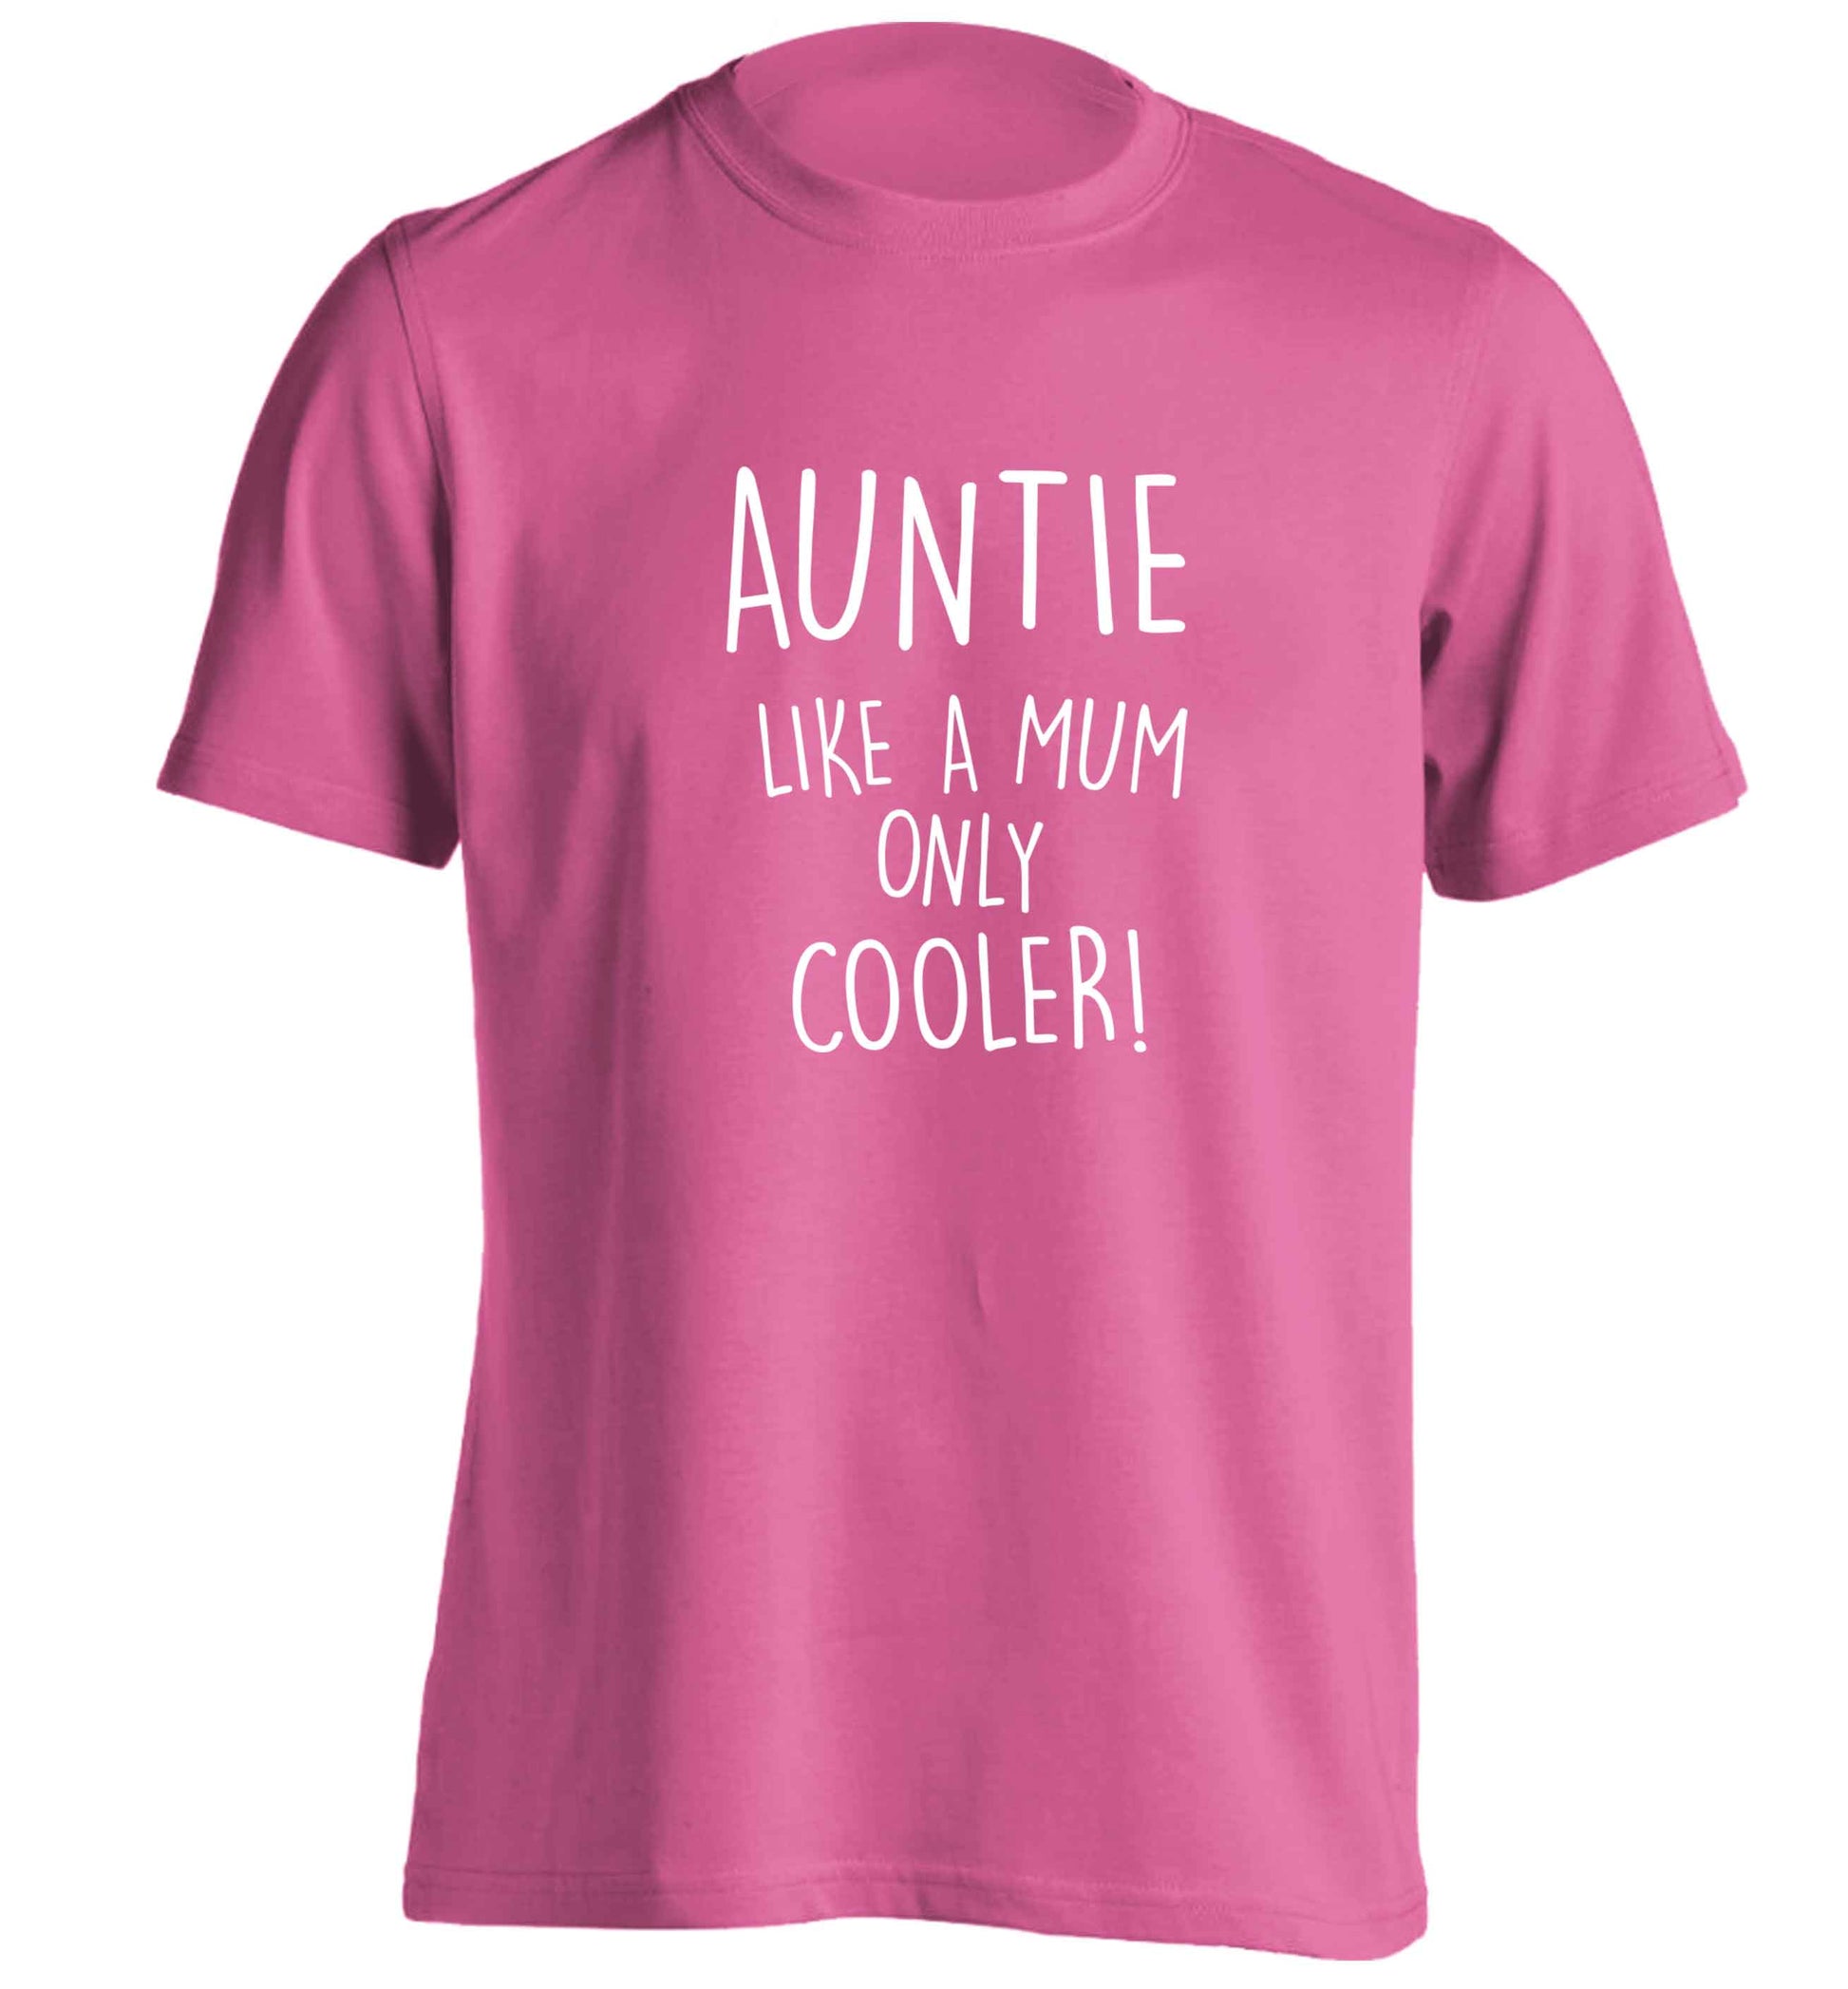 Auntie like a mum only cooler adults unisex pink Tshirt 2XL